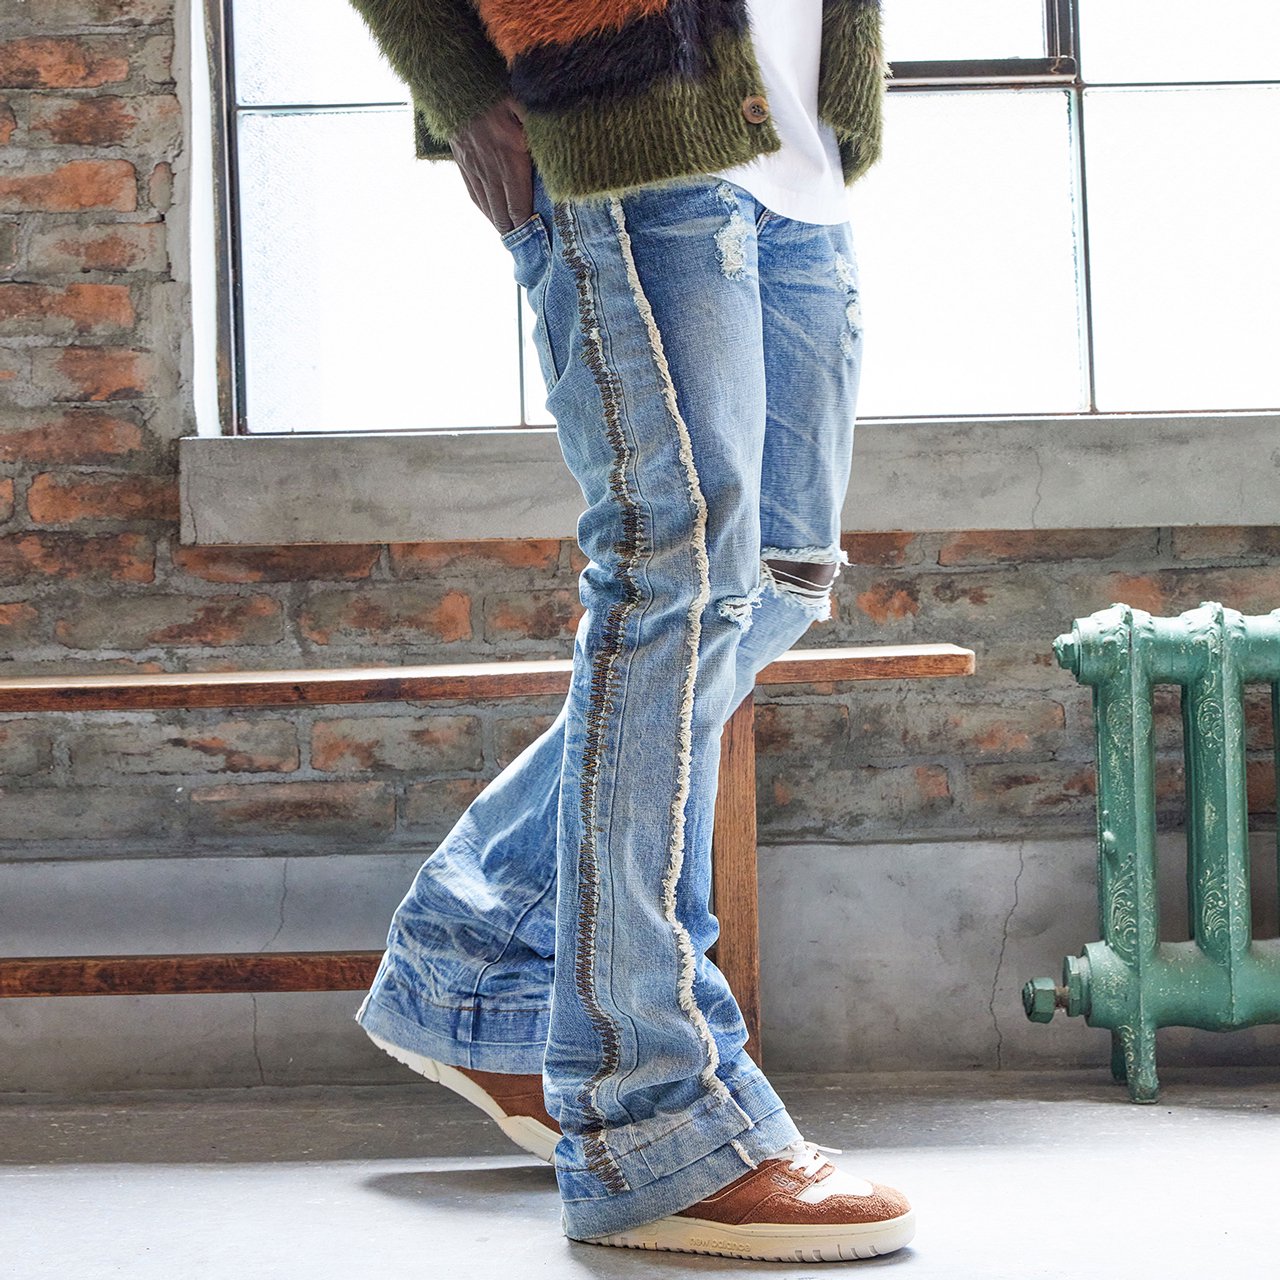 MLVINCE (メルヴィンス) 23AW/秋冬
DB FLARE JEANS INDIGO